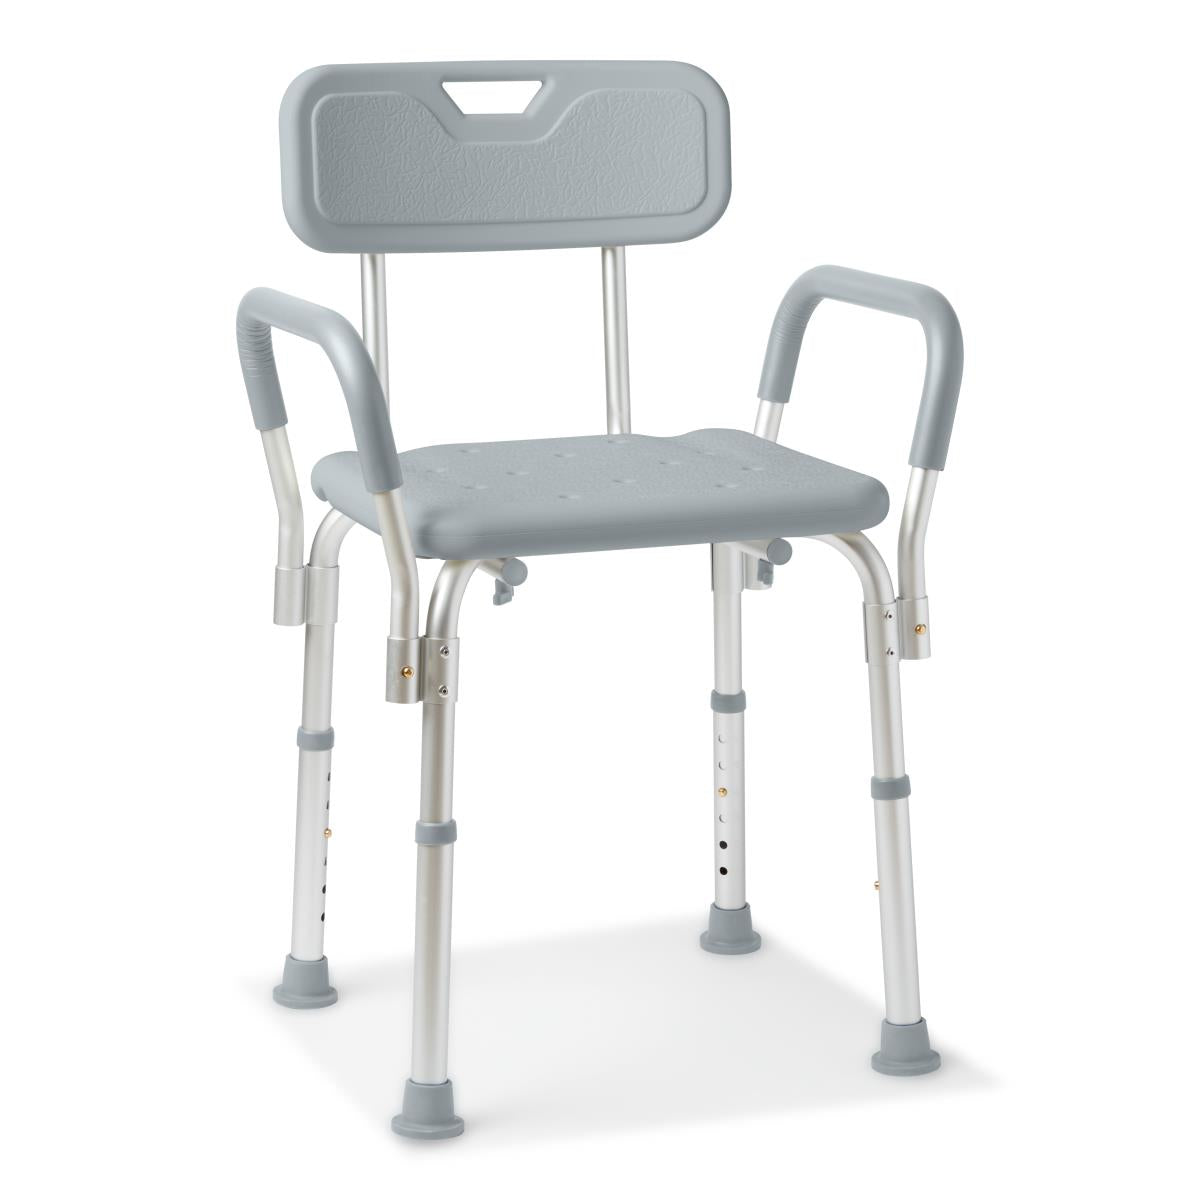 Bathroom Safety Shower Chairs